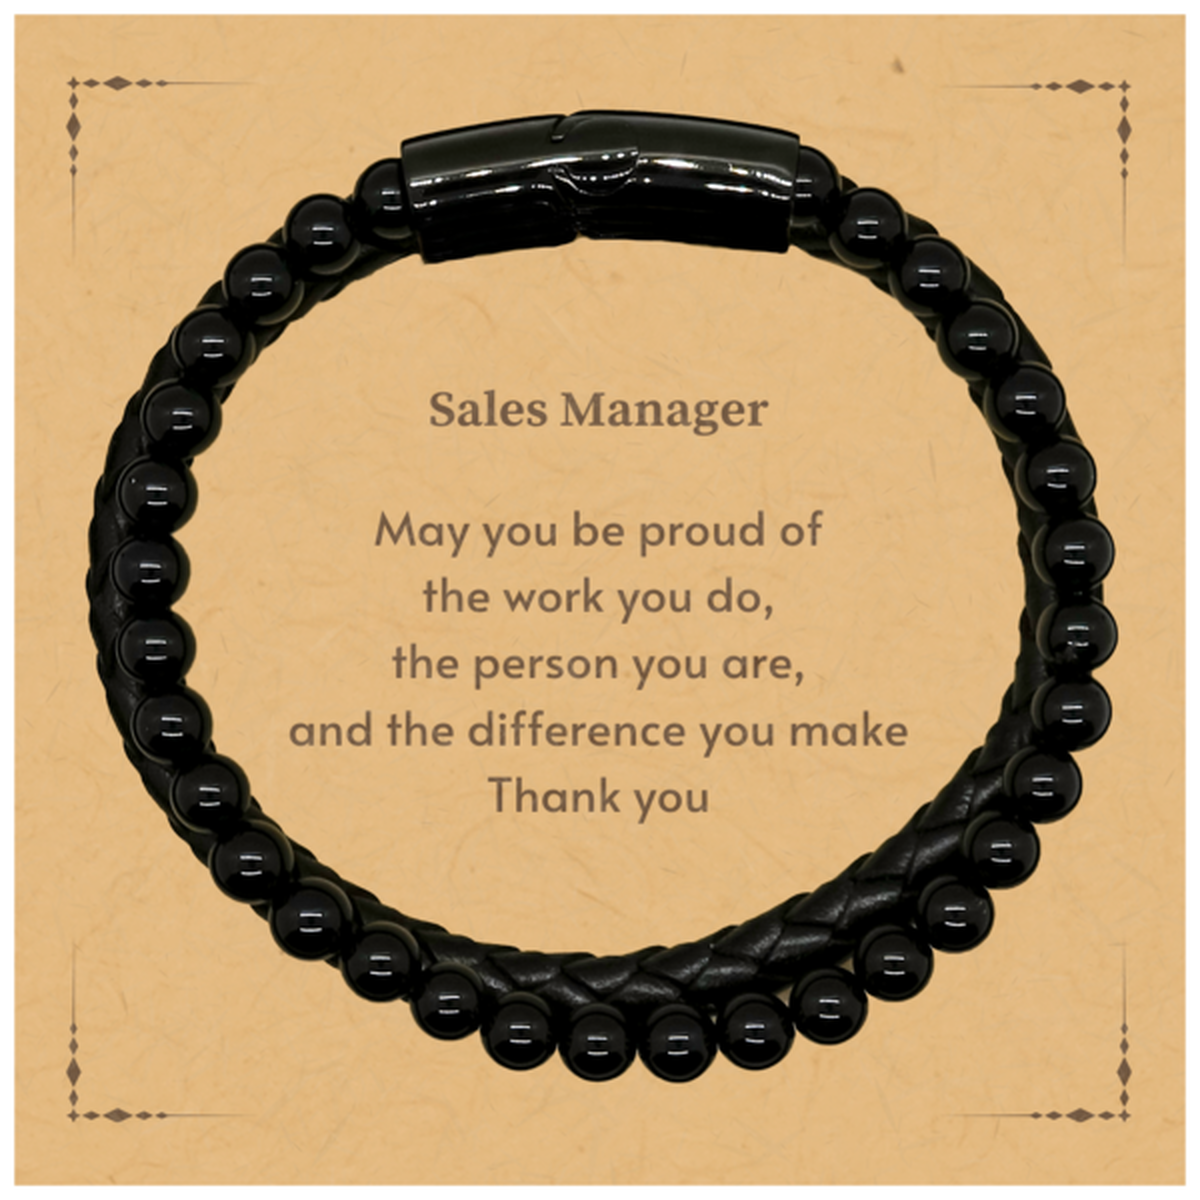 Heartwarming Stone Leather Bracelets Retirement Coworkers Gifts for Sales Manager, Sales Manager May You be proud of the work you do, the person you are Gifts for Boss Men Women Friends